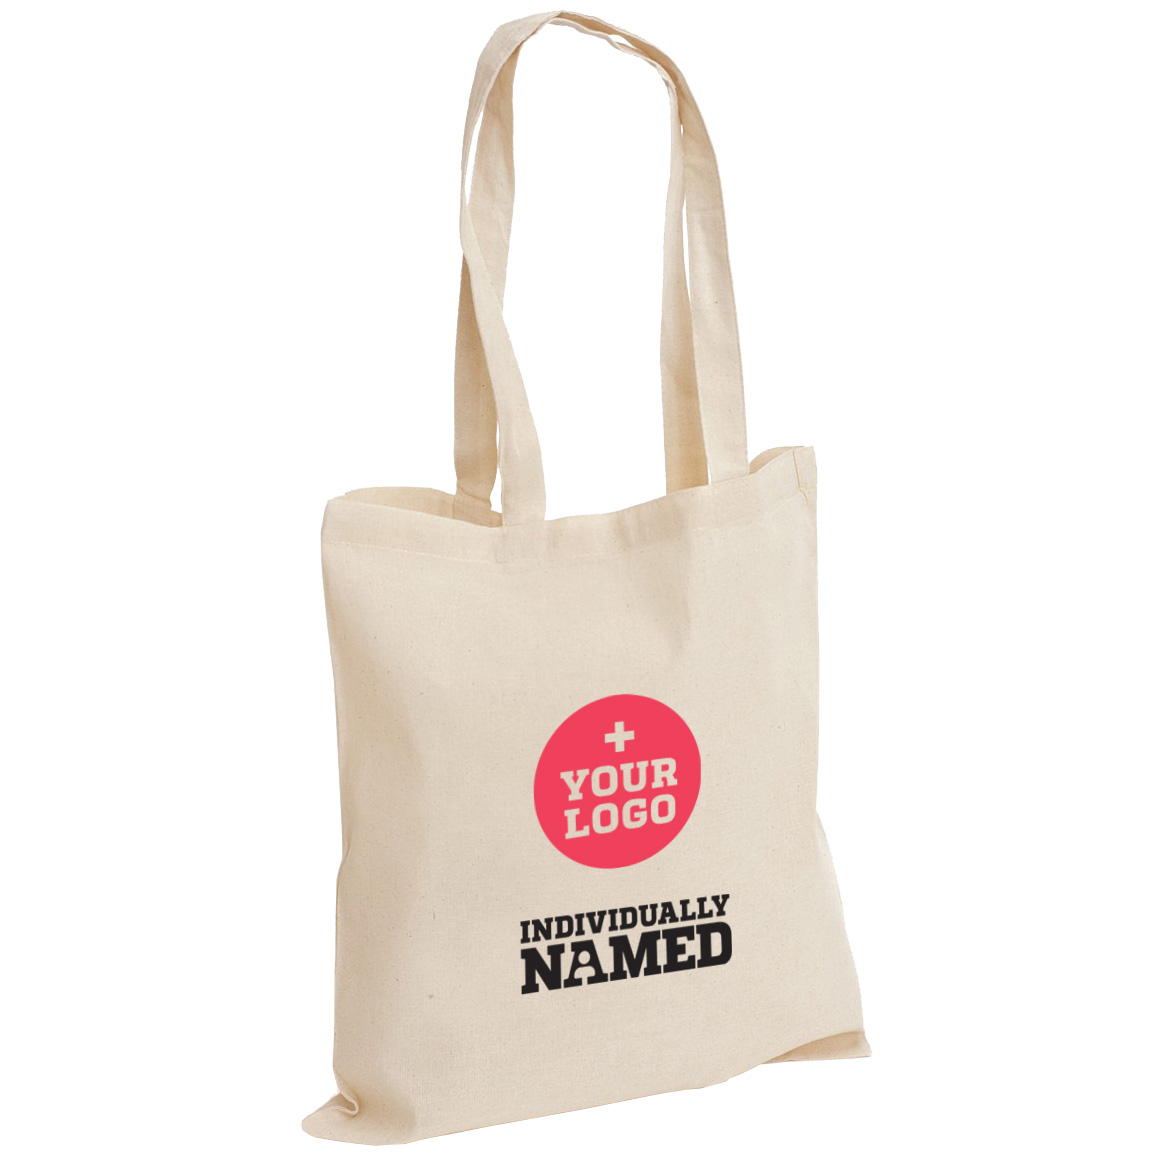 Branded Individually Named Cotton Tote Bags | Total Merchandise